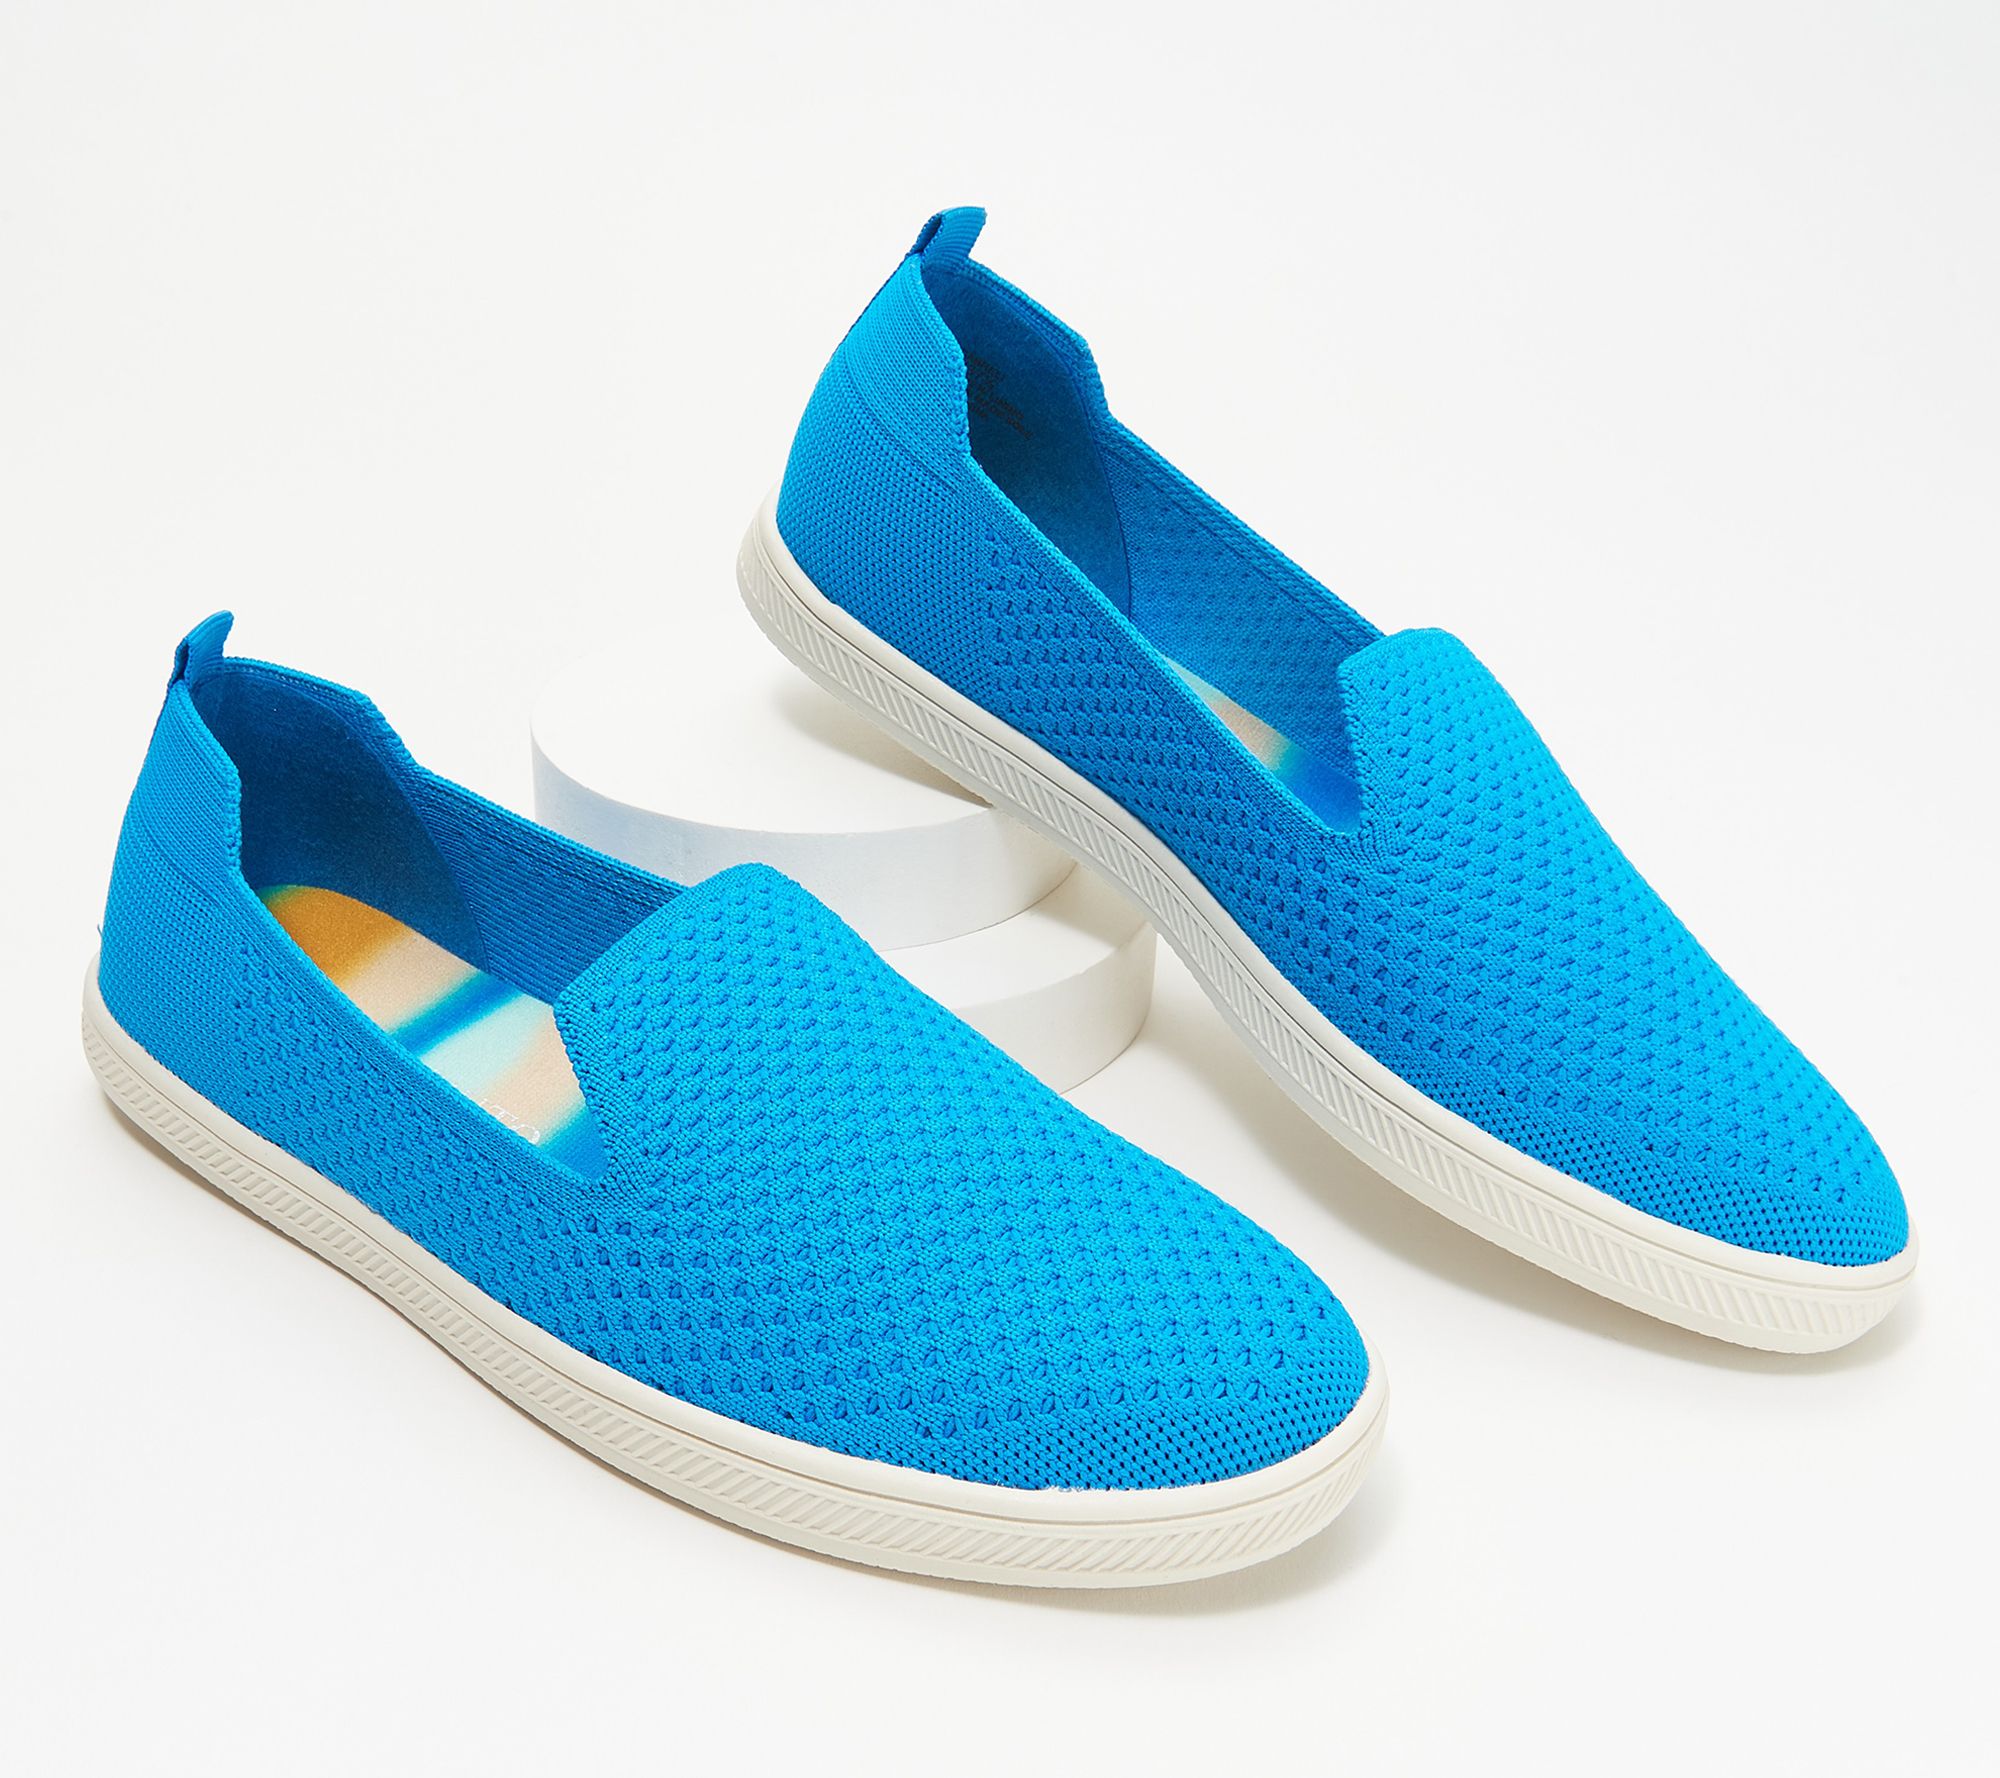 Vince Camuto Washable Knit Slip-On Shoes - Cabreli 